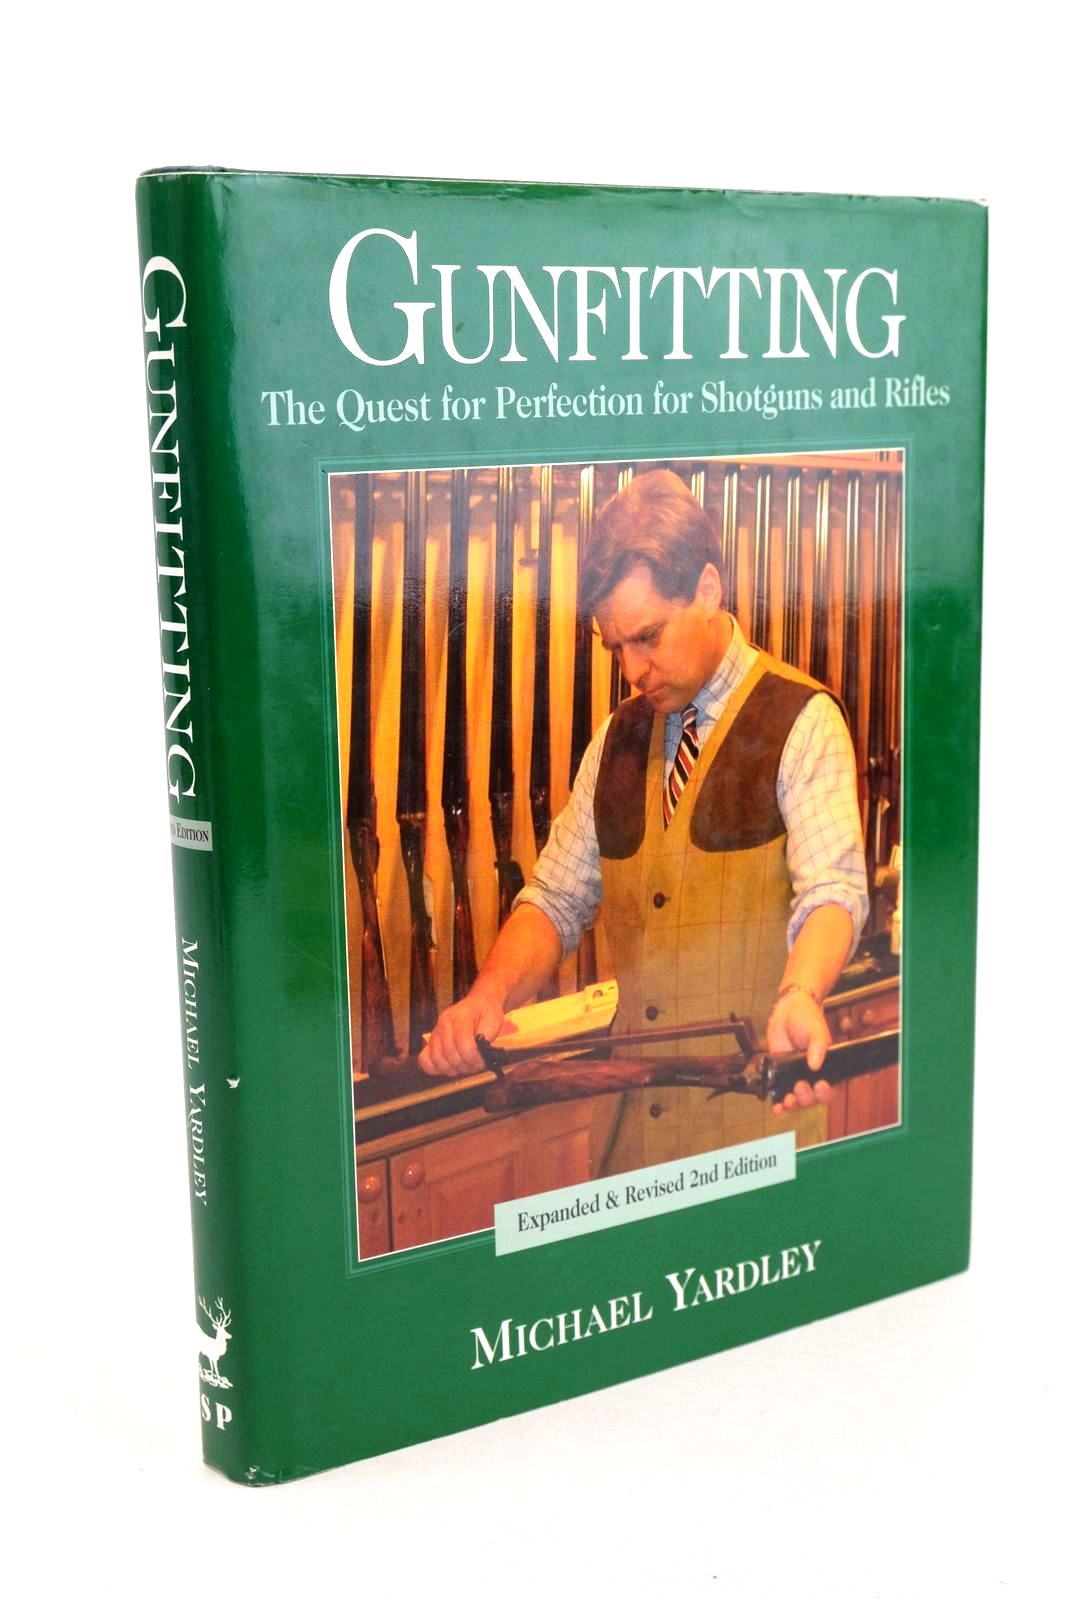 Photo of GUNFITTING: THE QUEST FOR PERFECTION FOR SHOTGUNS AND RIFLES written by Yardley, Michael published by The Sportsman's Press (STOCK CODE: 1327275)  for sale by Stella & Rose's Books